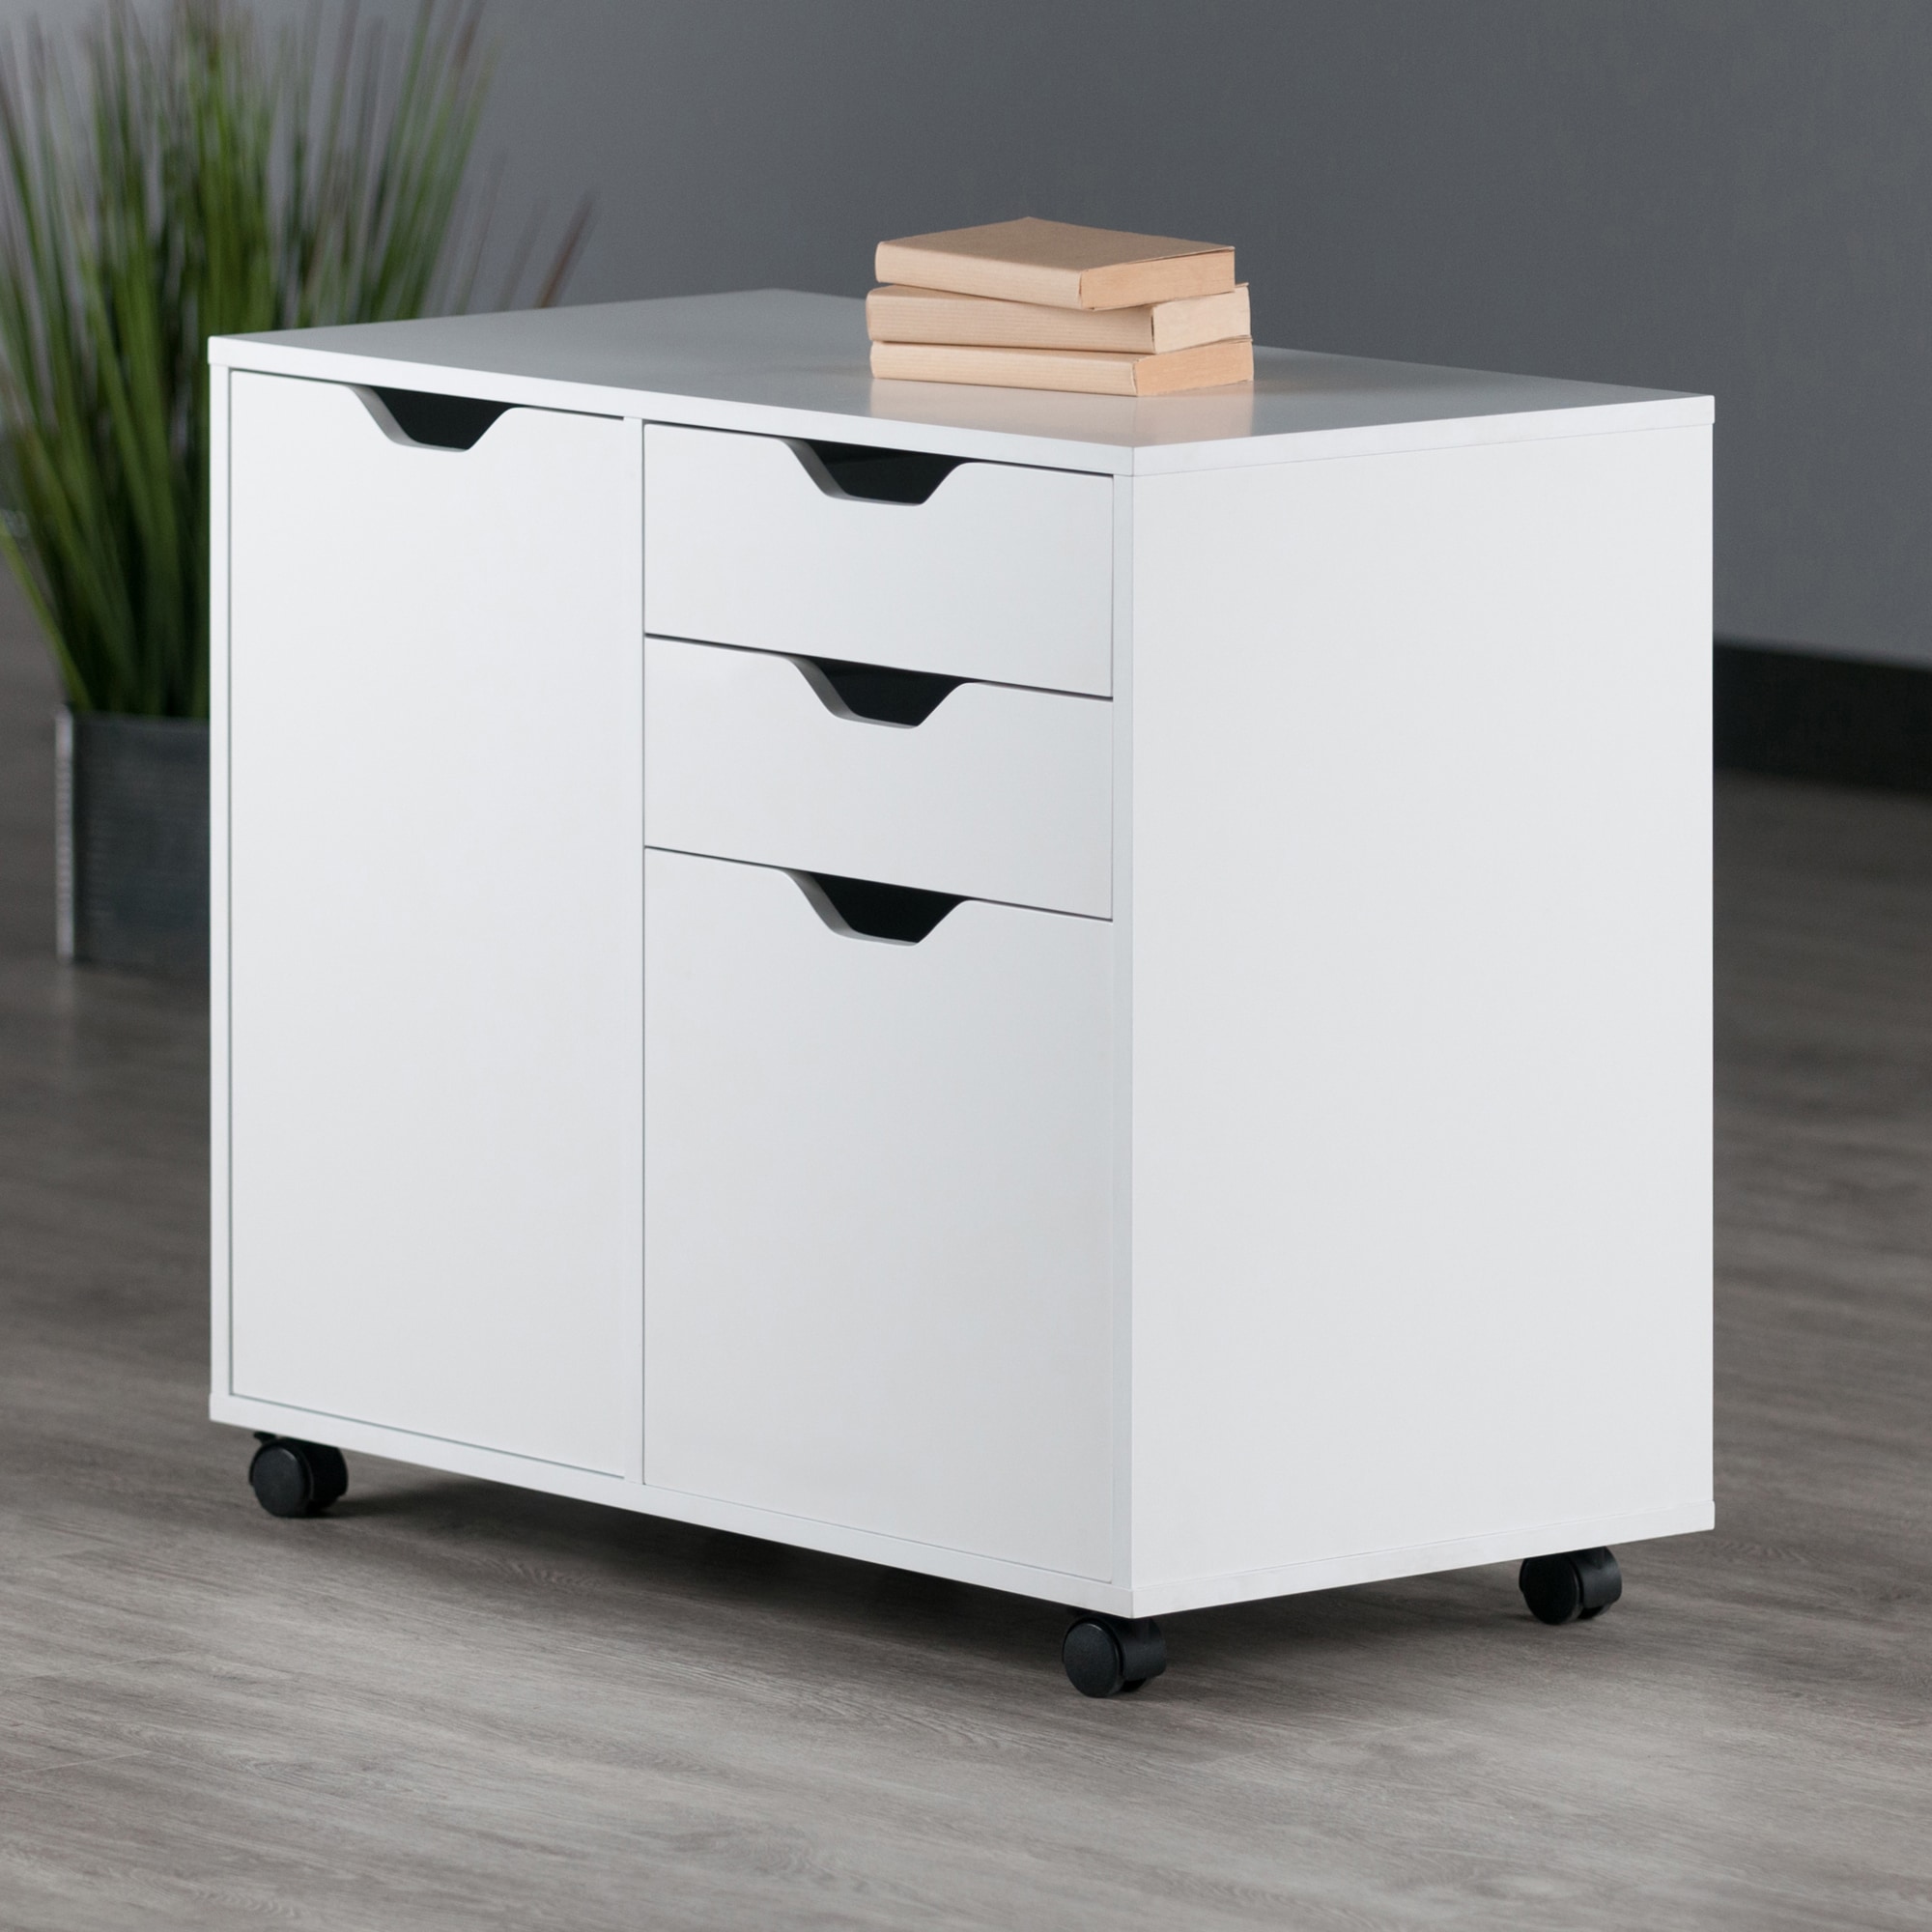 Tribesigns 3 Drawer File Cabinet with Lock, Mobile Lateral Filing Cabinet, White, Contemporary Style, Open Storage Shelves, Home Office Organizer